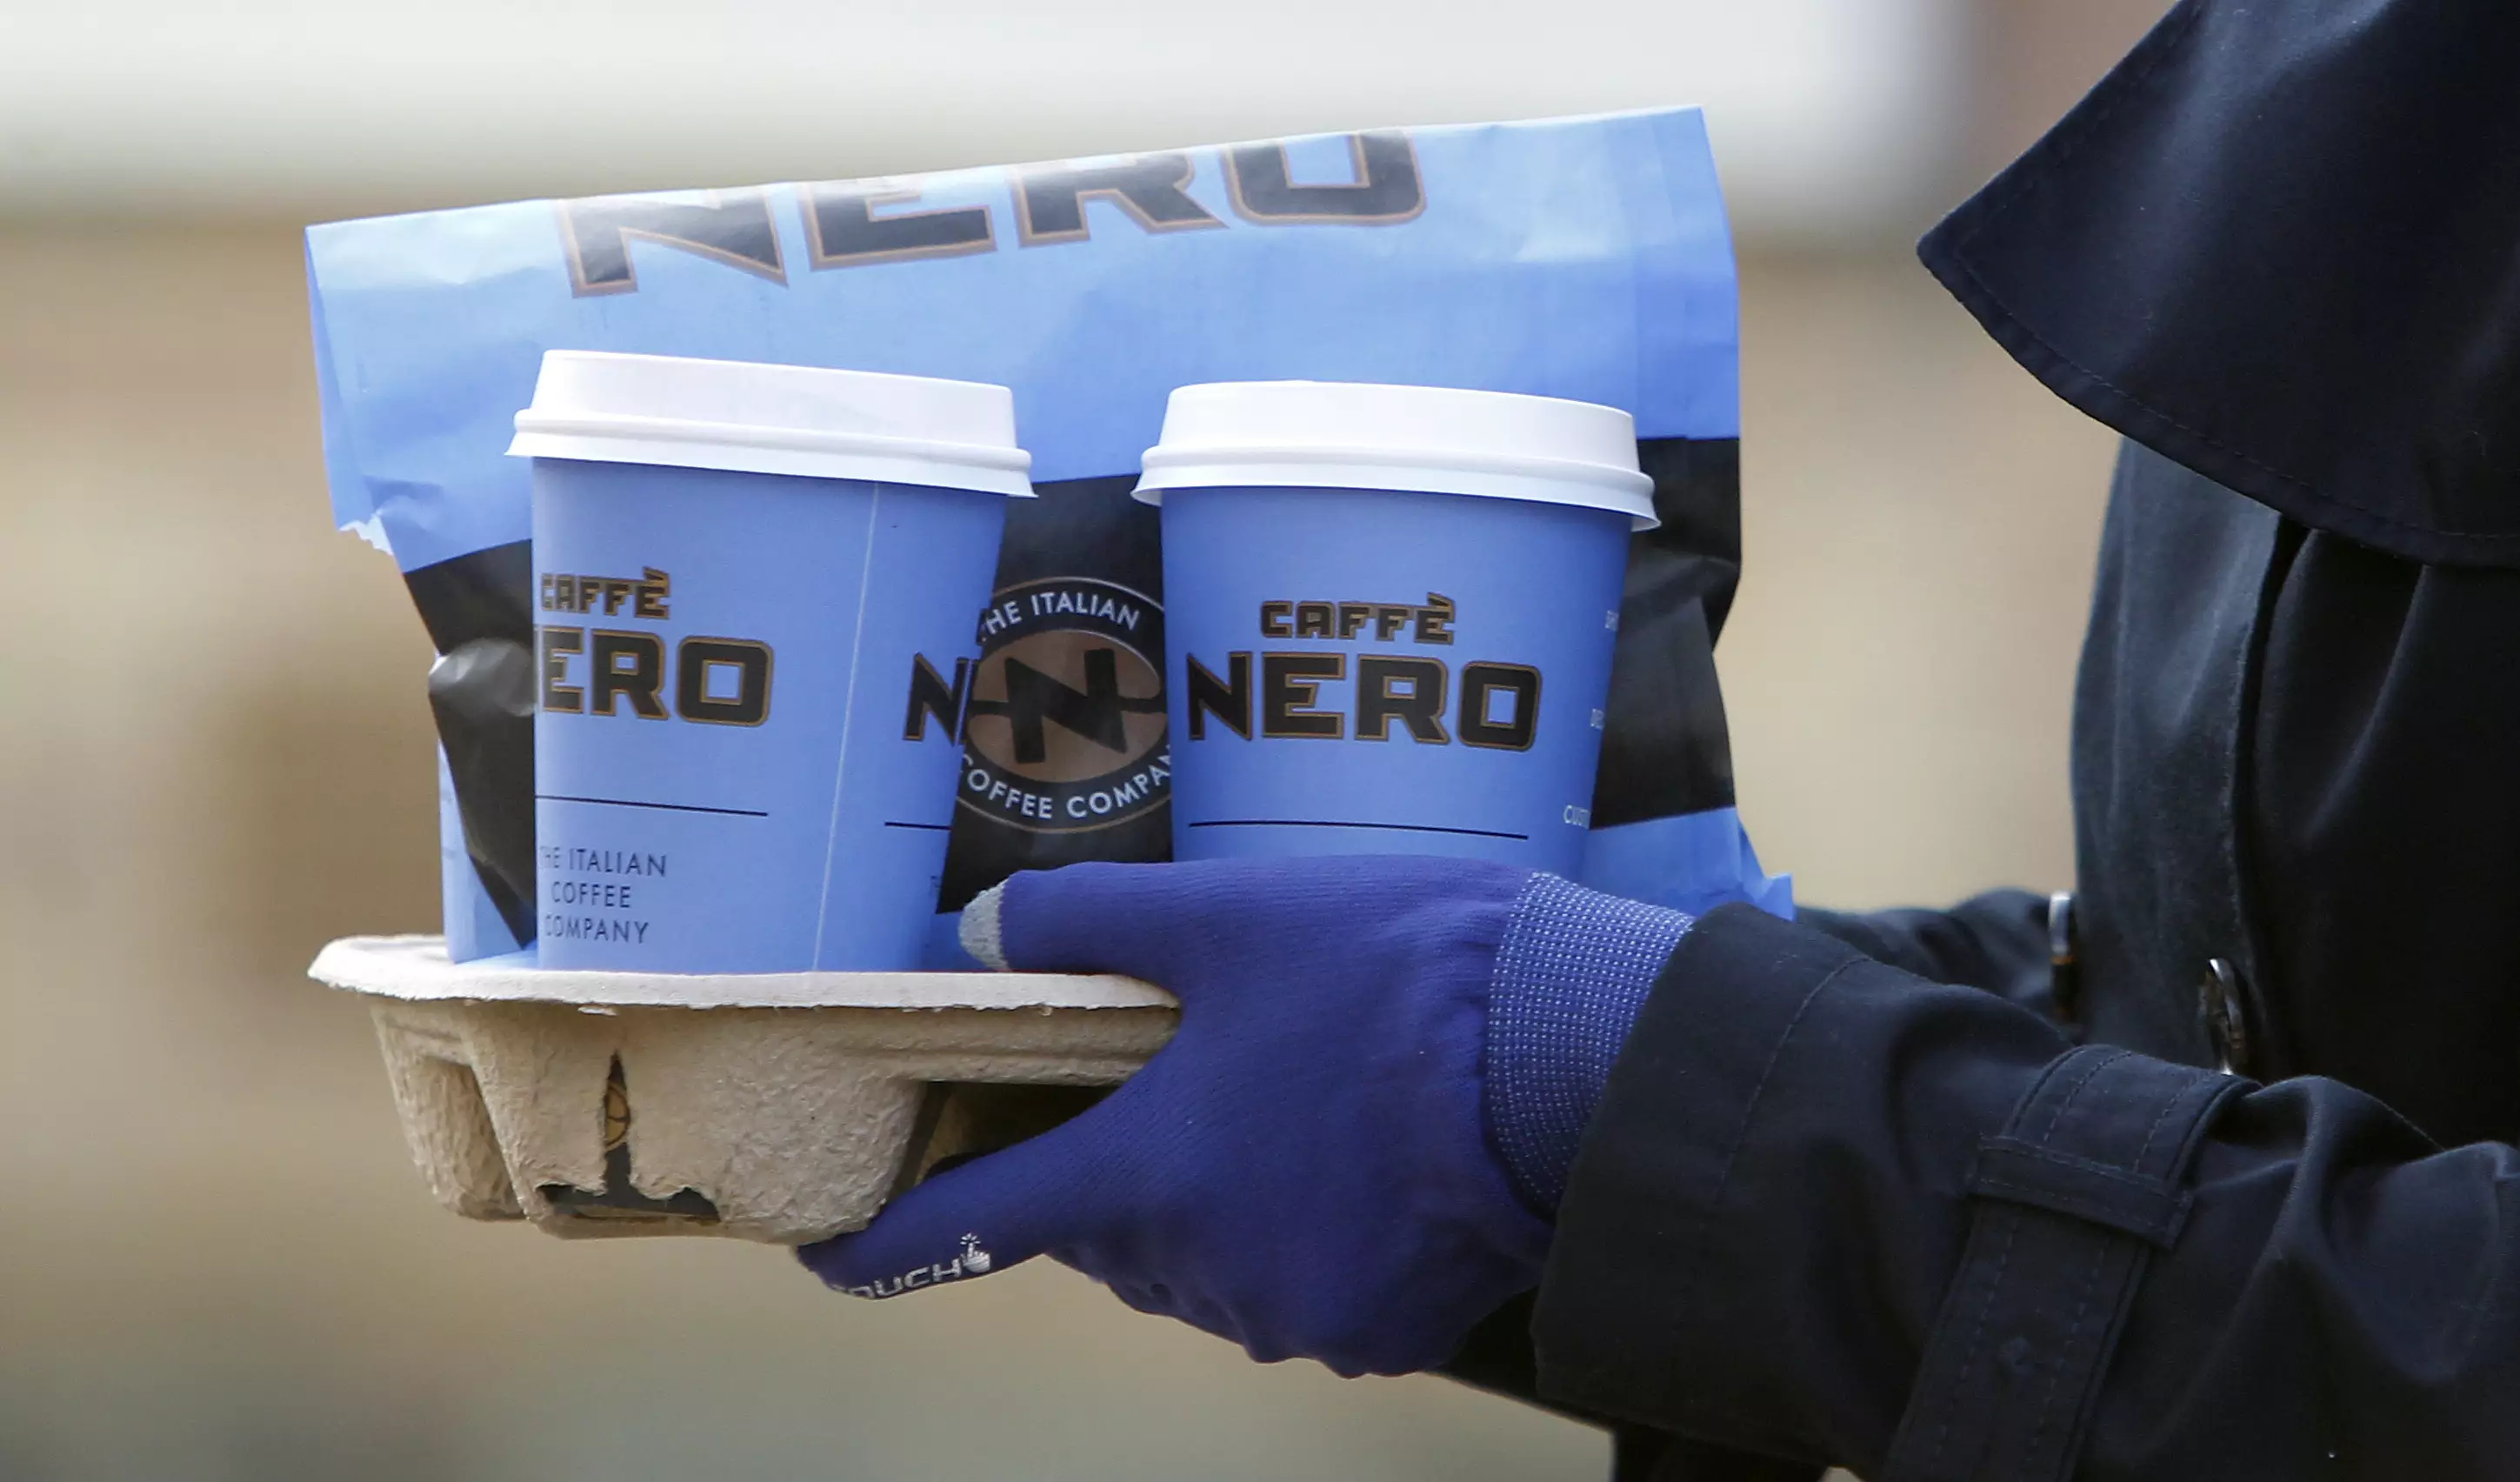 Caffe Nero's festive drink packs a sugary punch.